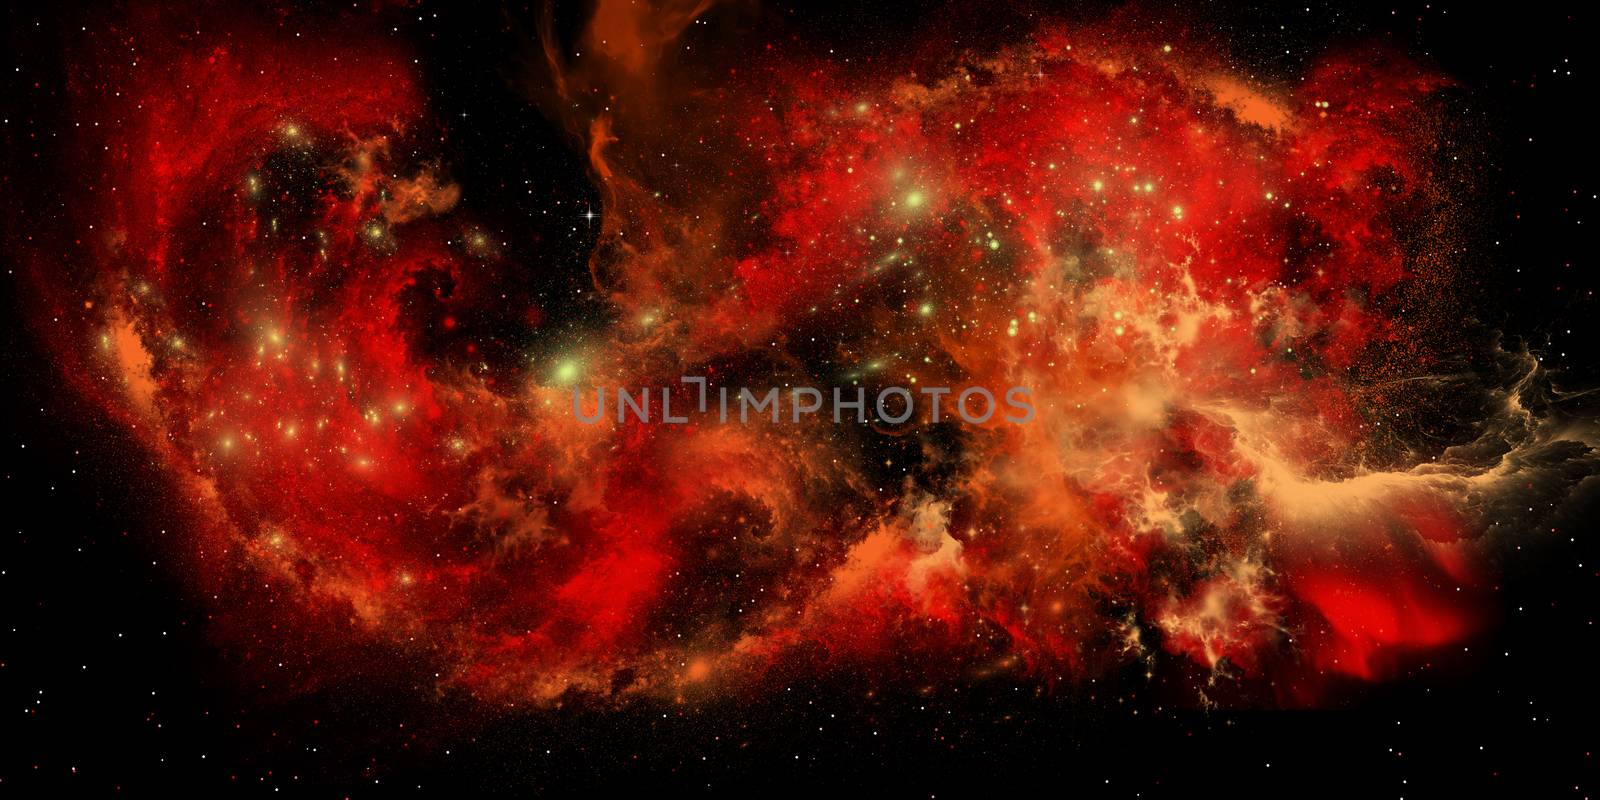 A nebula is a collection of interstellar gasses, dust and matter in which stars are born.